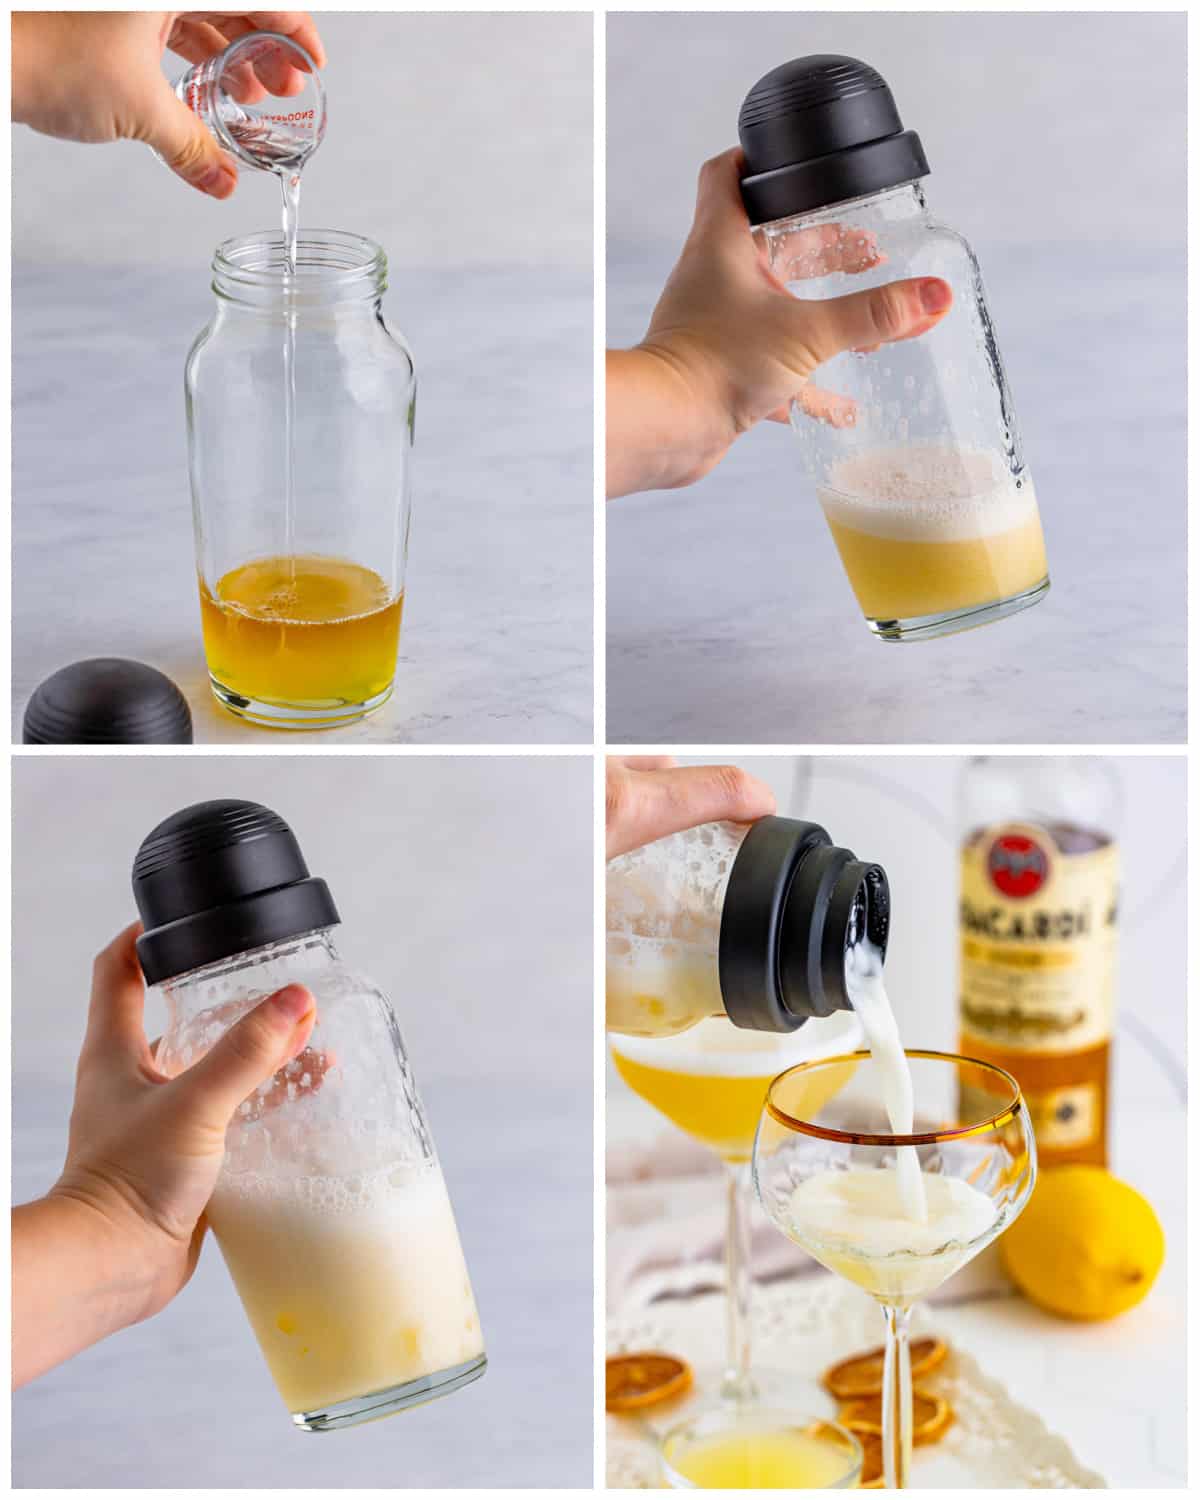 Step by step photos on how to make a Rum Sour.